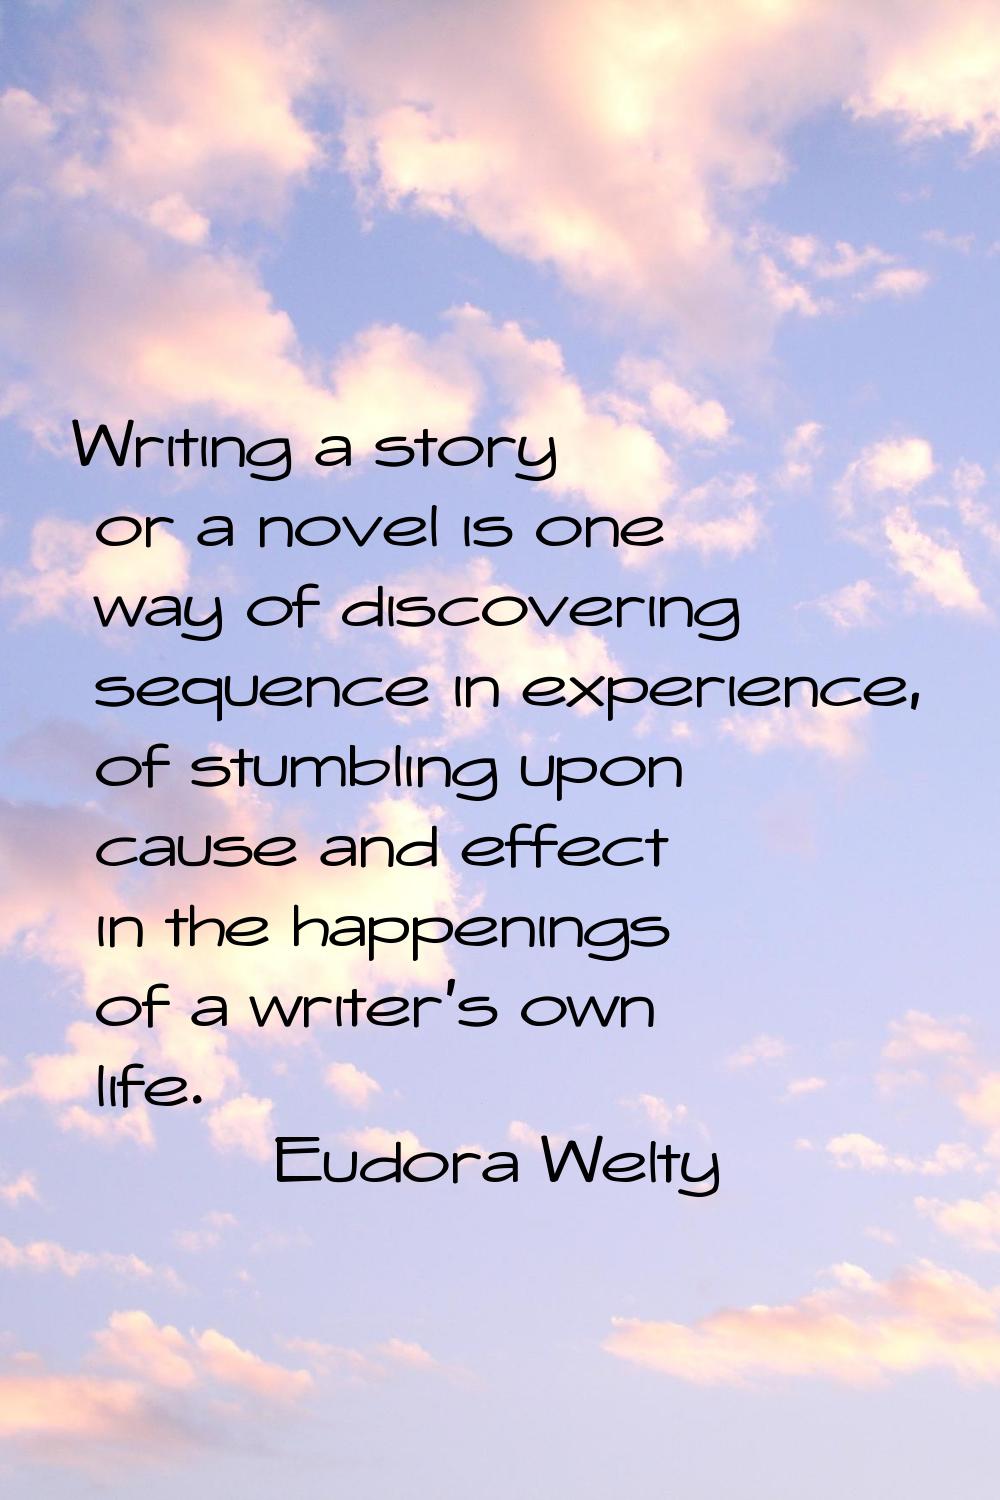 Writing a story or a novel is one way of discovering sequence in experience, of stumbling upon caus